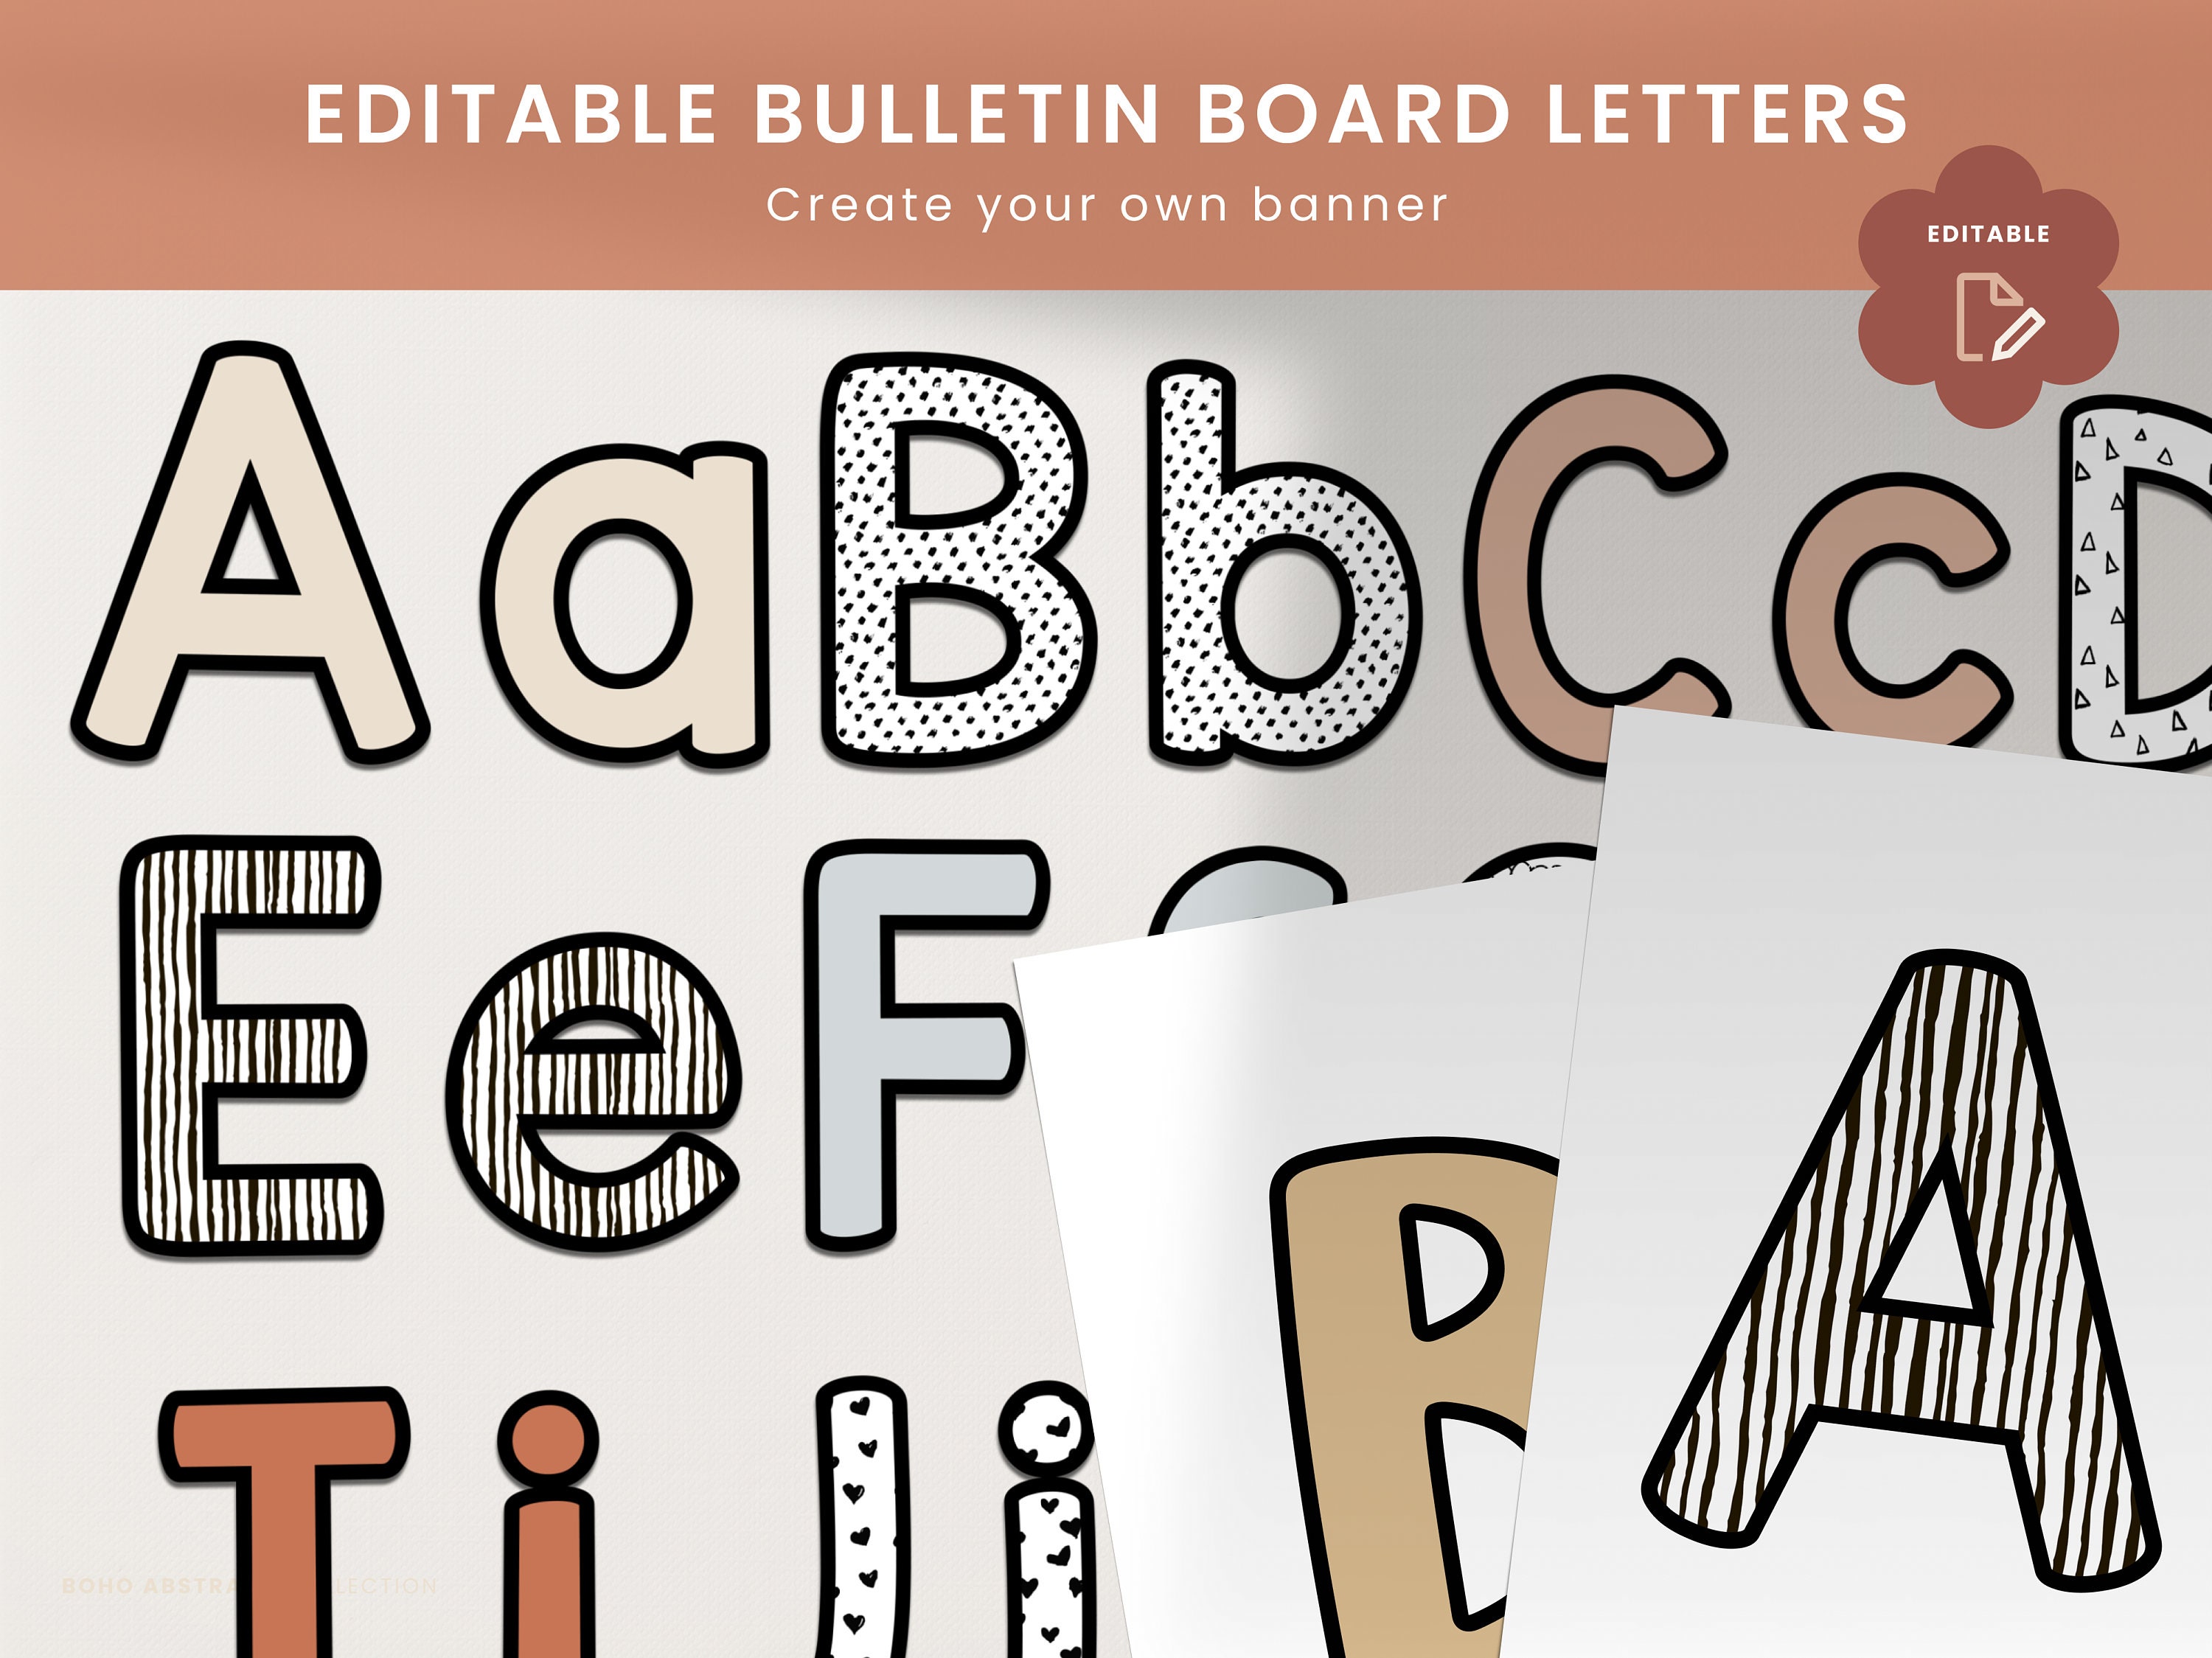 Bulletin Board Letters (Printable): Blue and Orange  Bulletin board letters,  Bulletin boards, Classroom posters